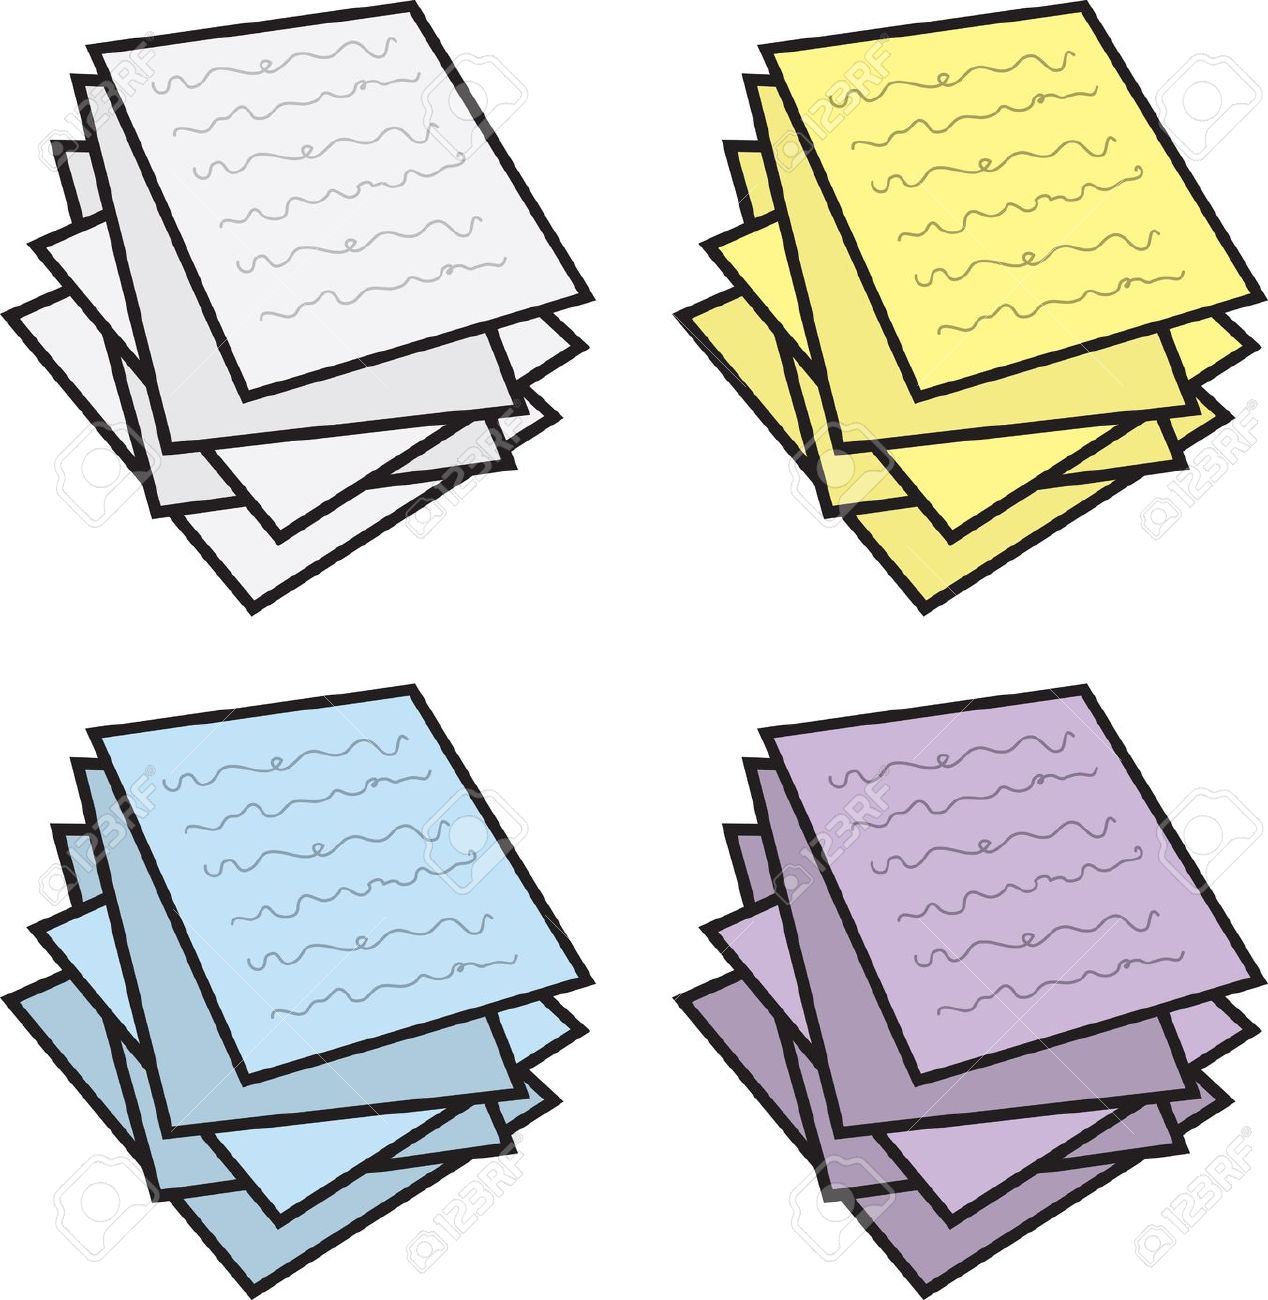 Piles of paper clipart